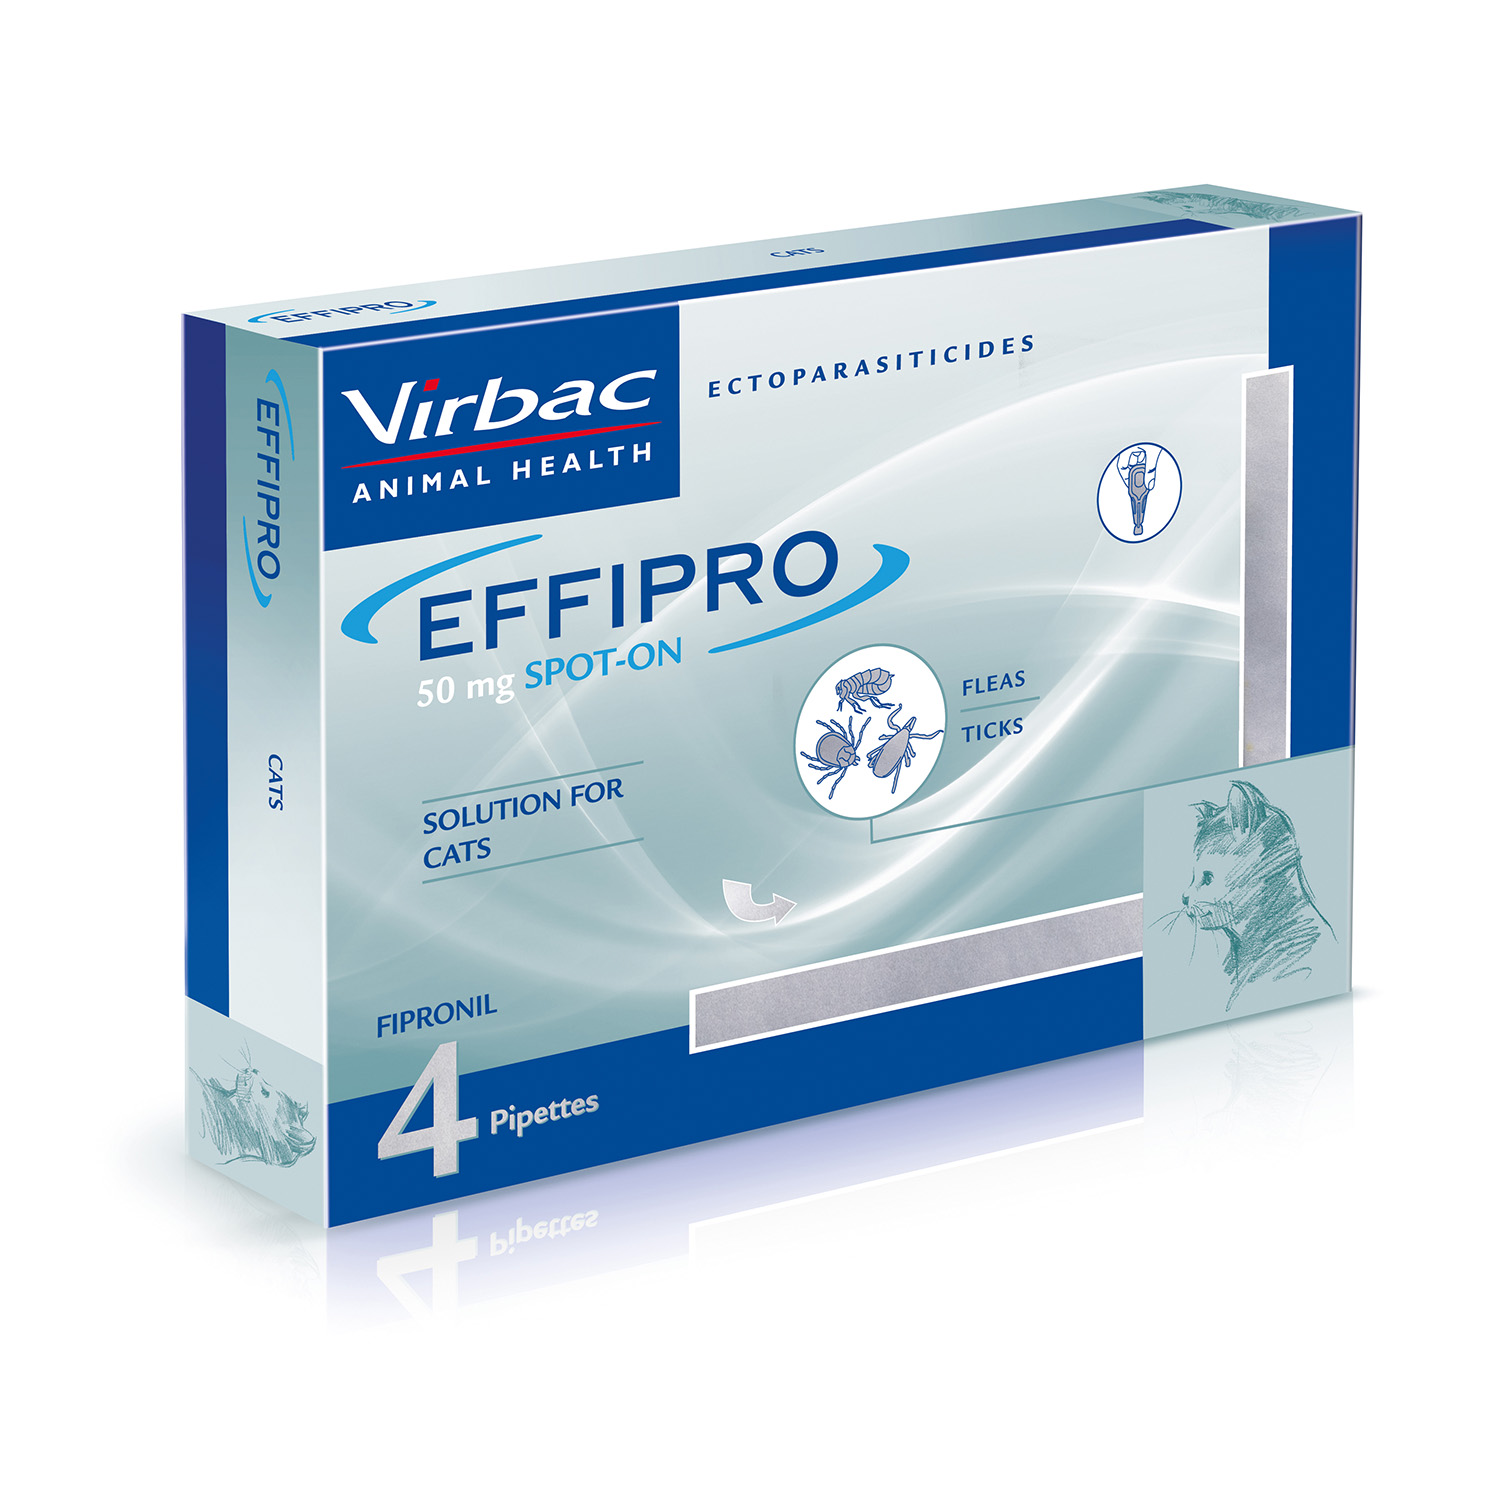 VIRBAC EFFIPRO SPOT ON FOR CATS 4 PIPETTES 4 PIPETTES